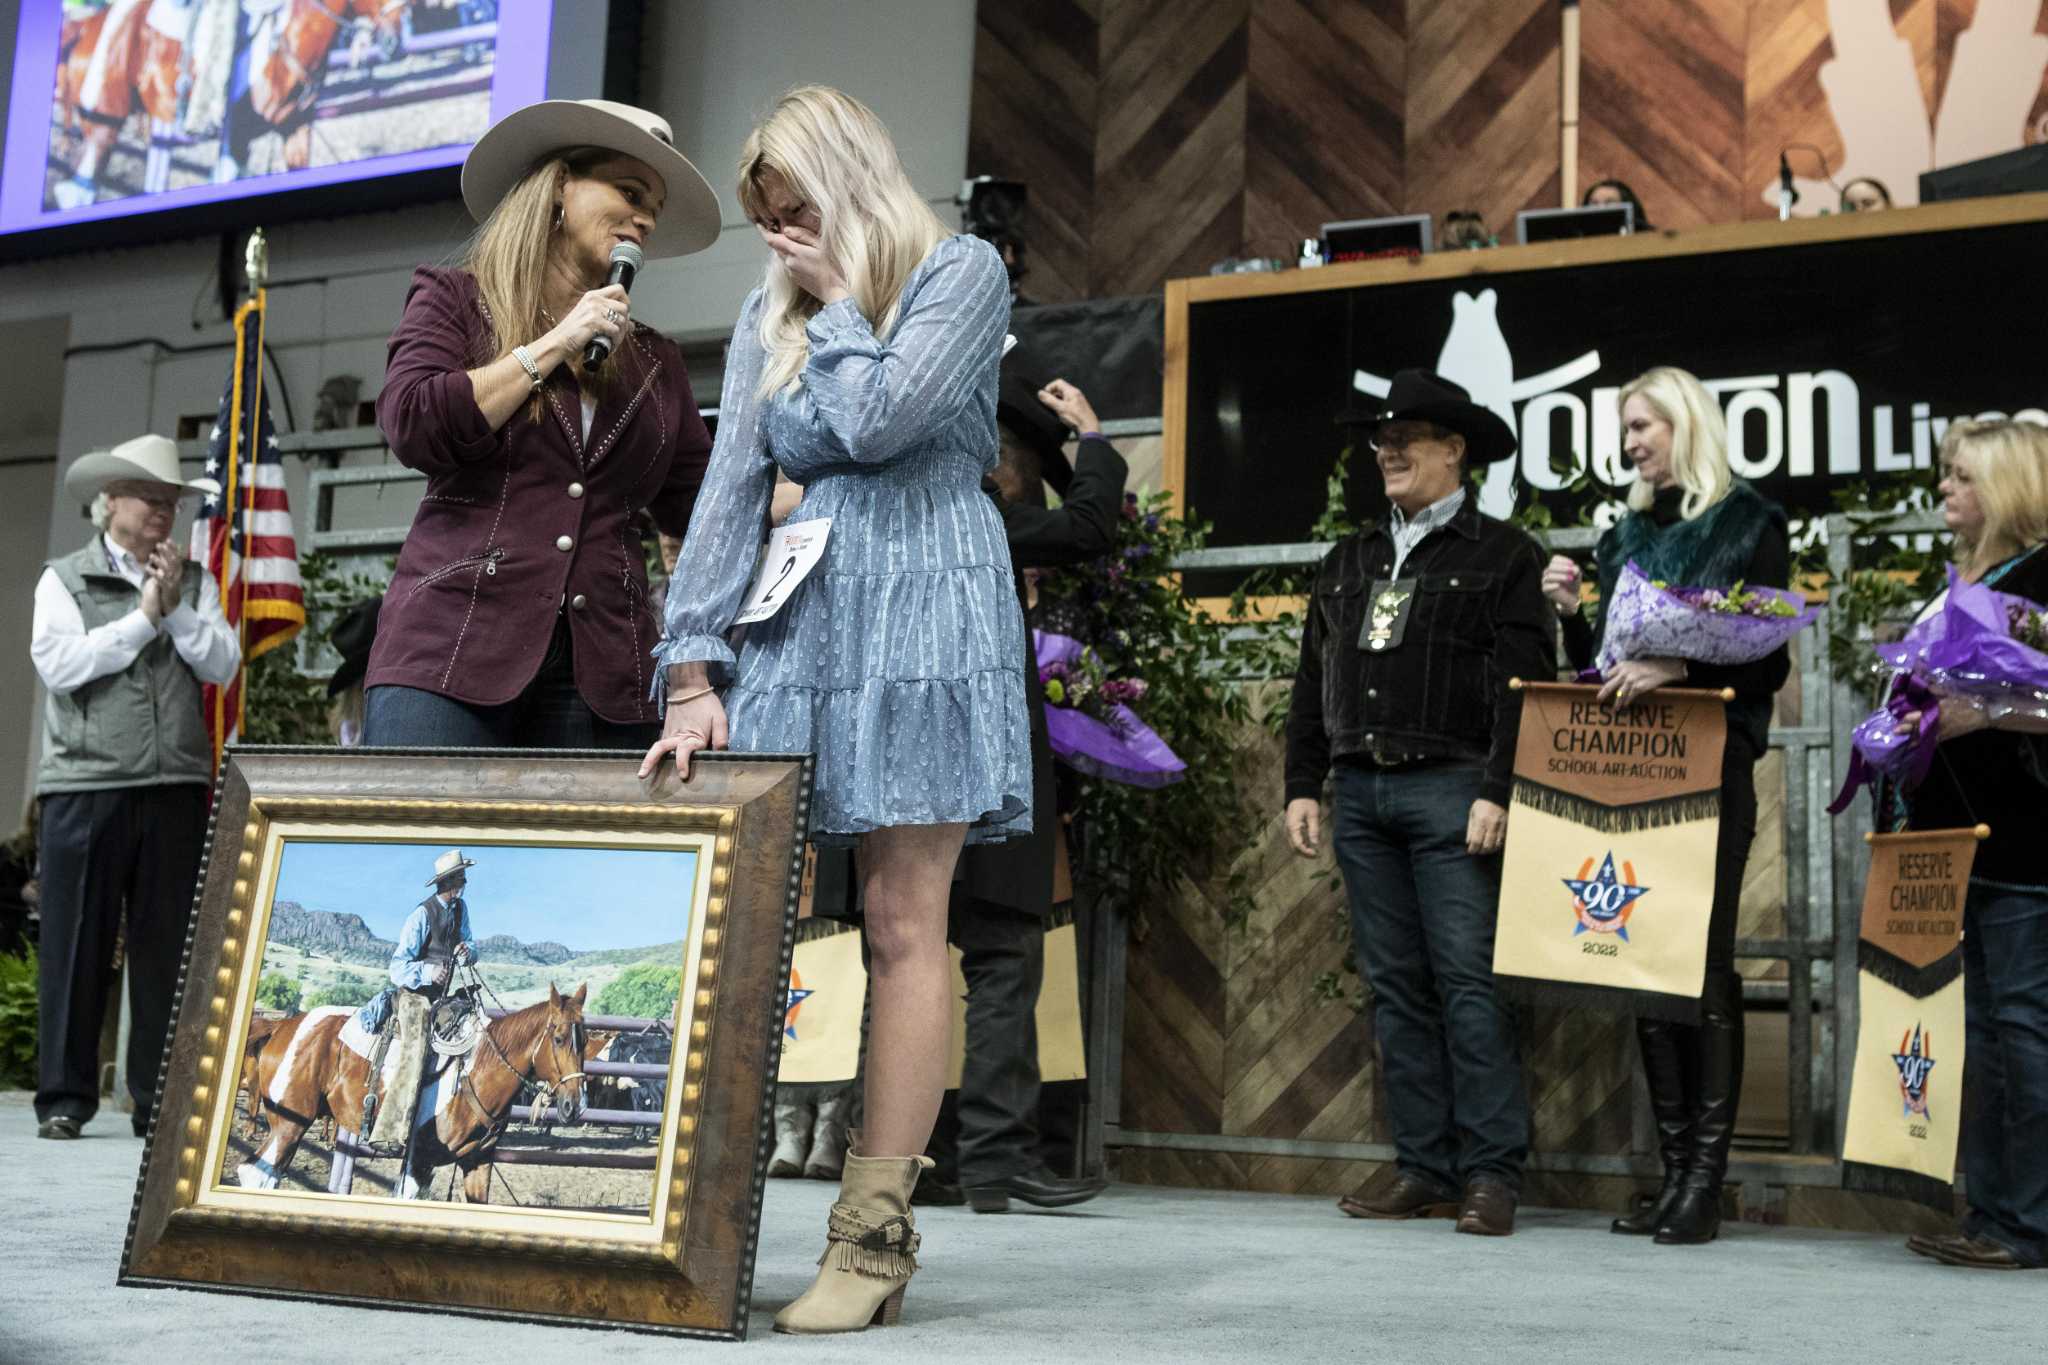 Houston Rodeo’s once-a-year college student art auction breaks data 1 painting sells for $265,000